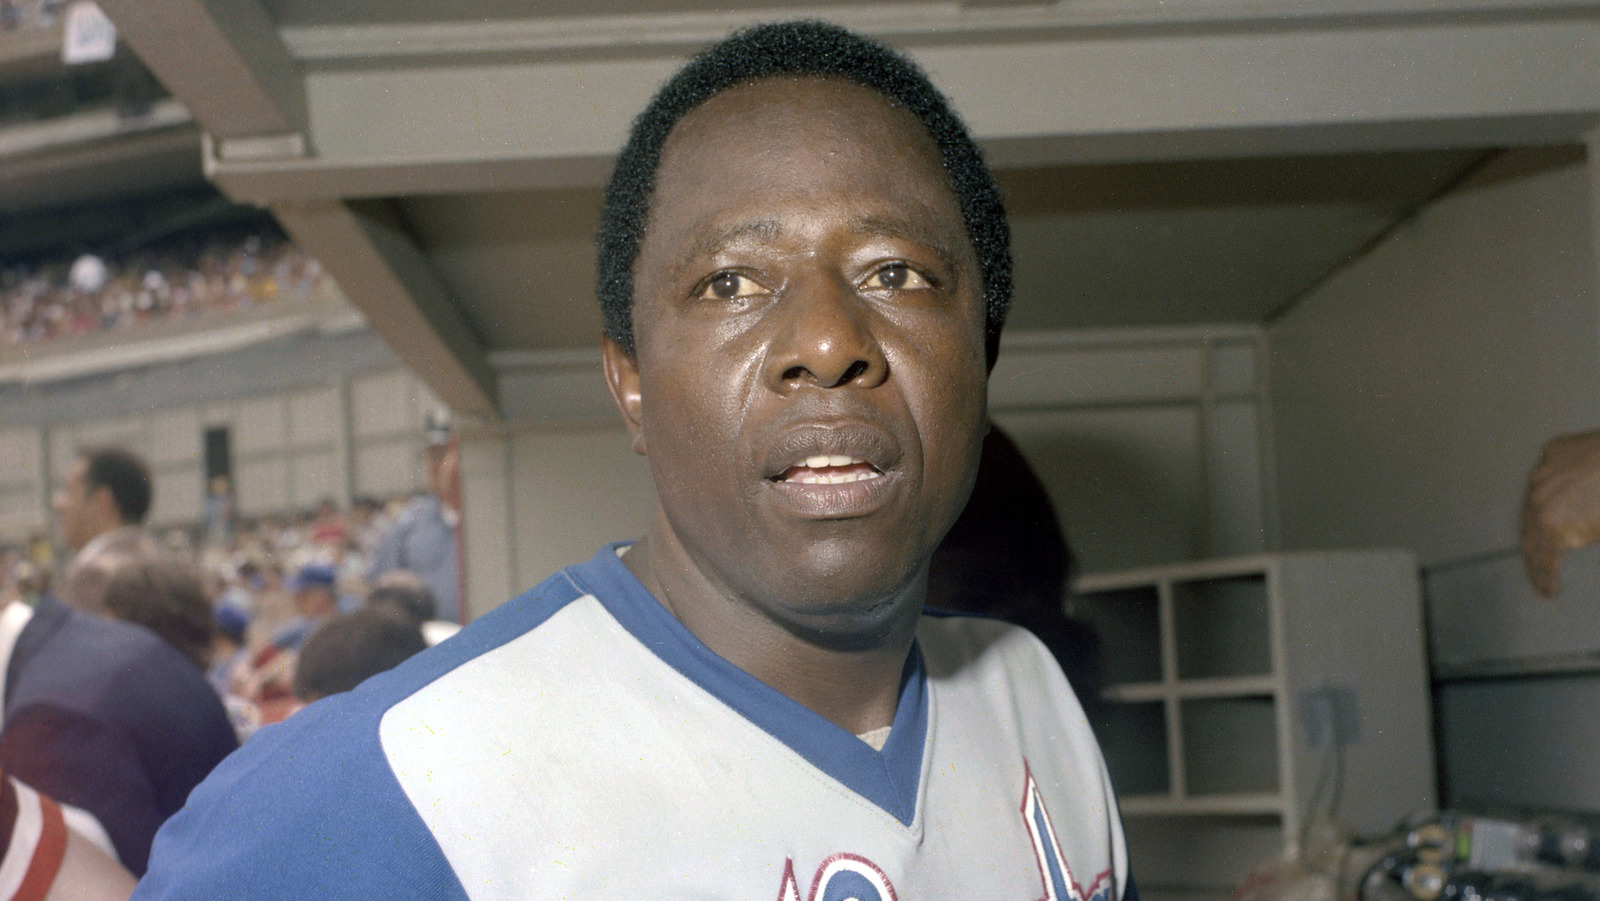 Hank Aaron shared how he wanted to be remembered in 2020 TODAY interview